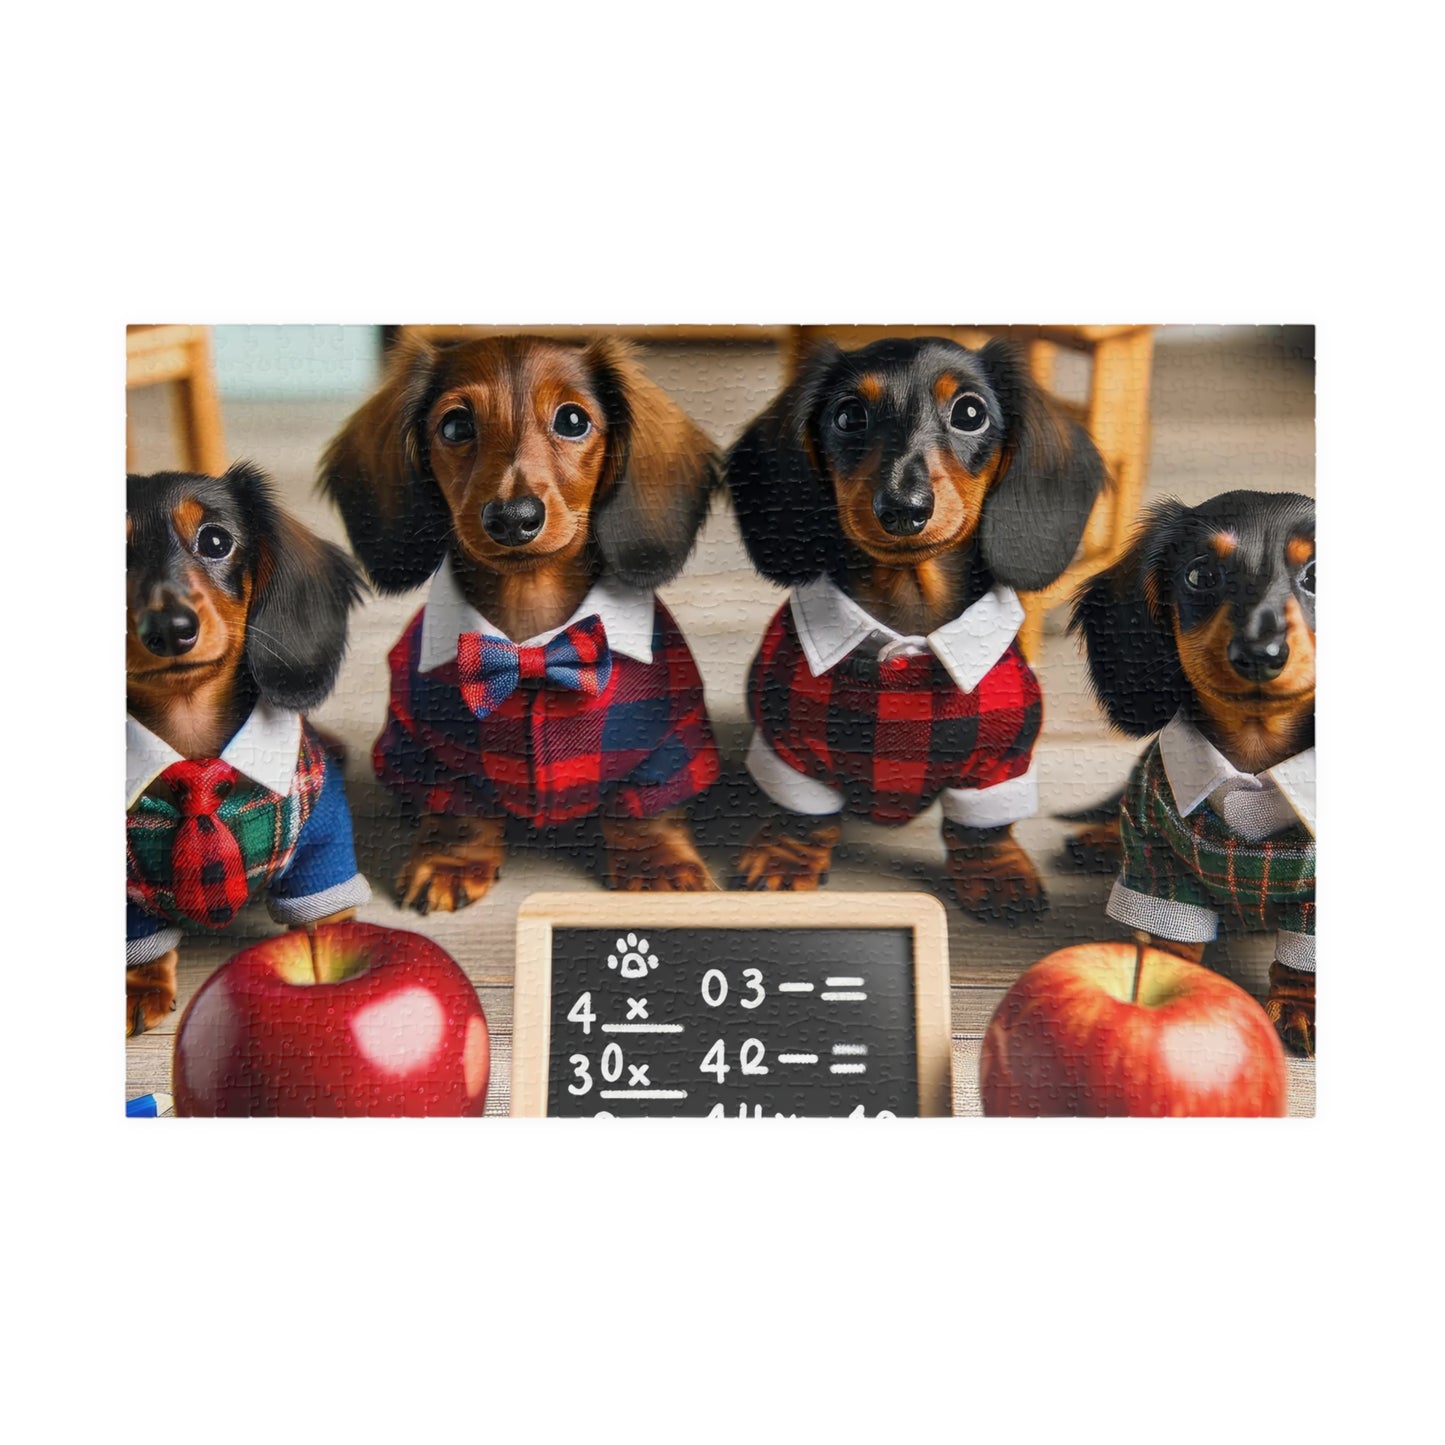 Adorable Classroom Miniature Dachshund Jigsaw Puzzle - Mini Doxie Puppy 110, 252, 520 or 1014 Pieces